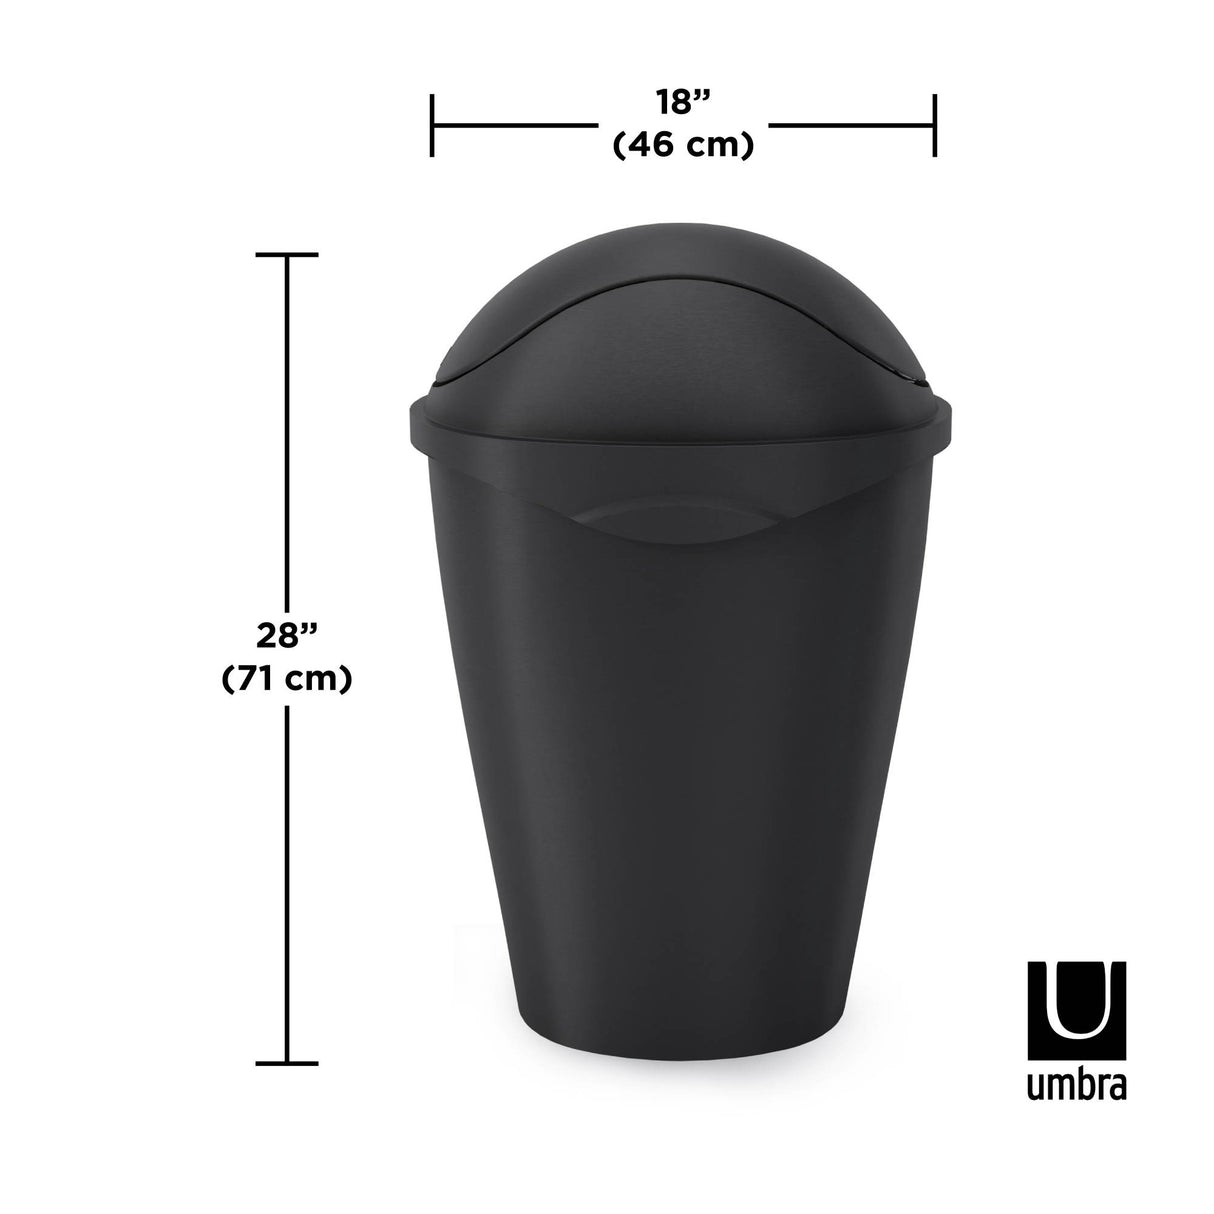 umbra garbage can canada